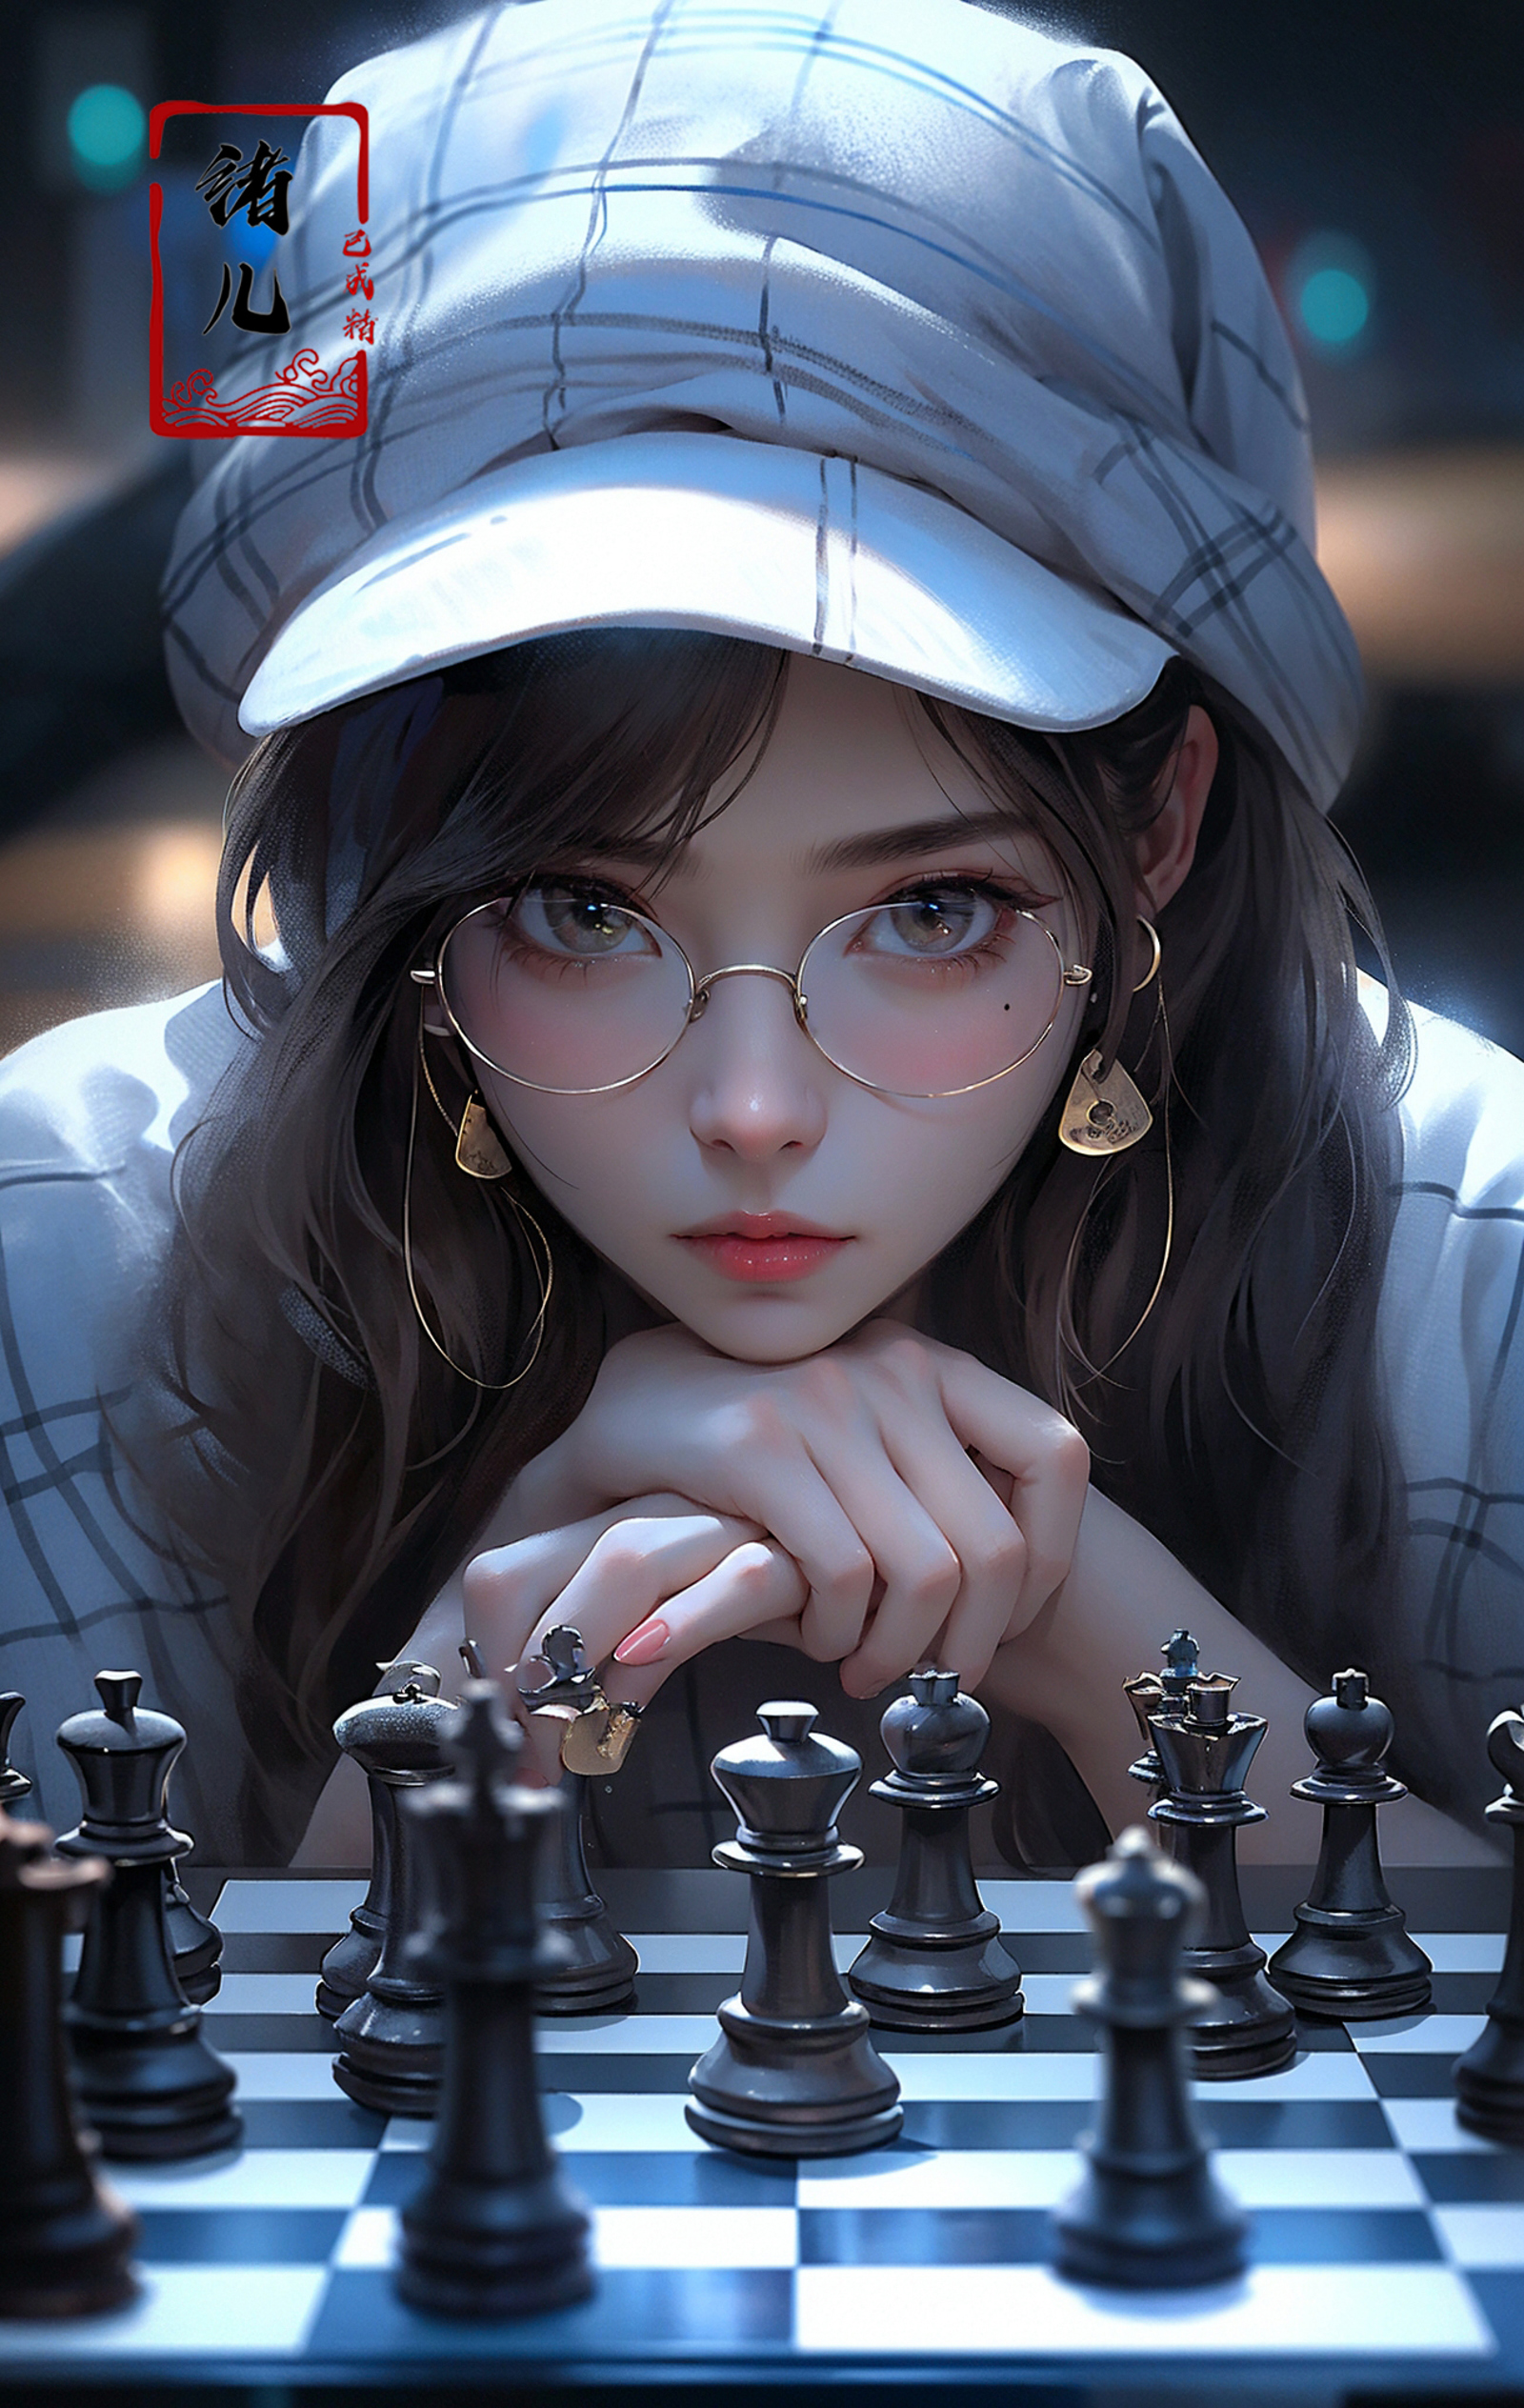 A woman with glasses and a hat is playing chess, which includes a close-up of her hands on the chessboard.